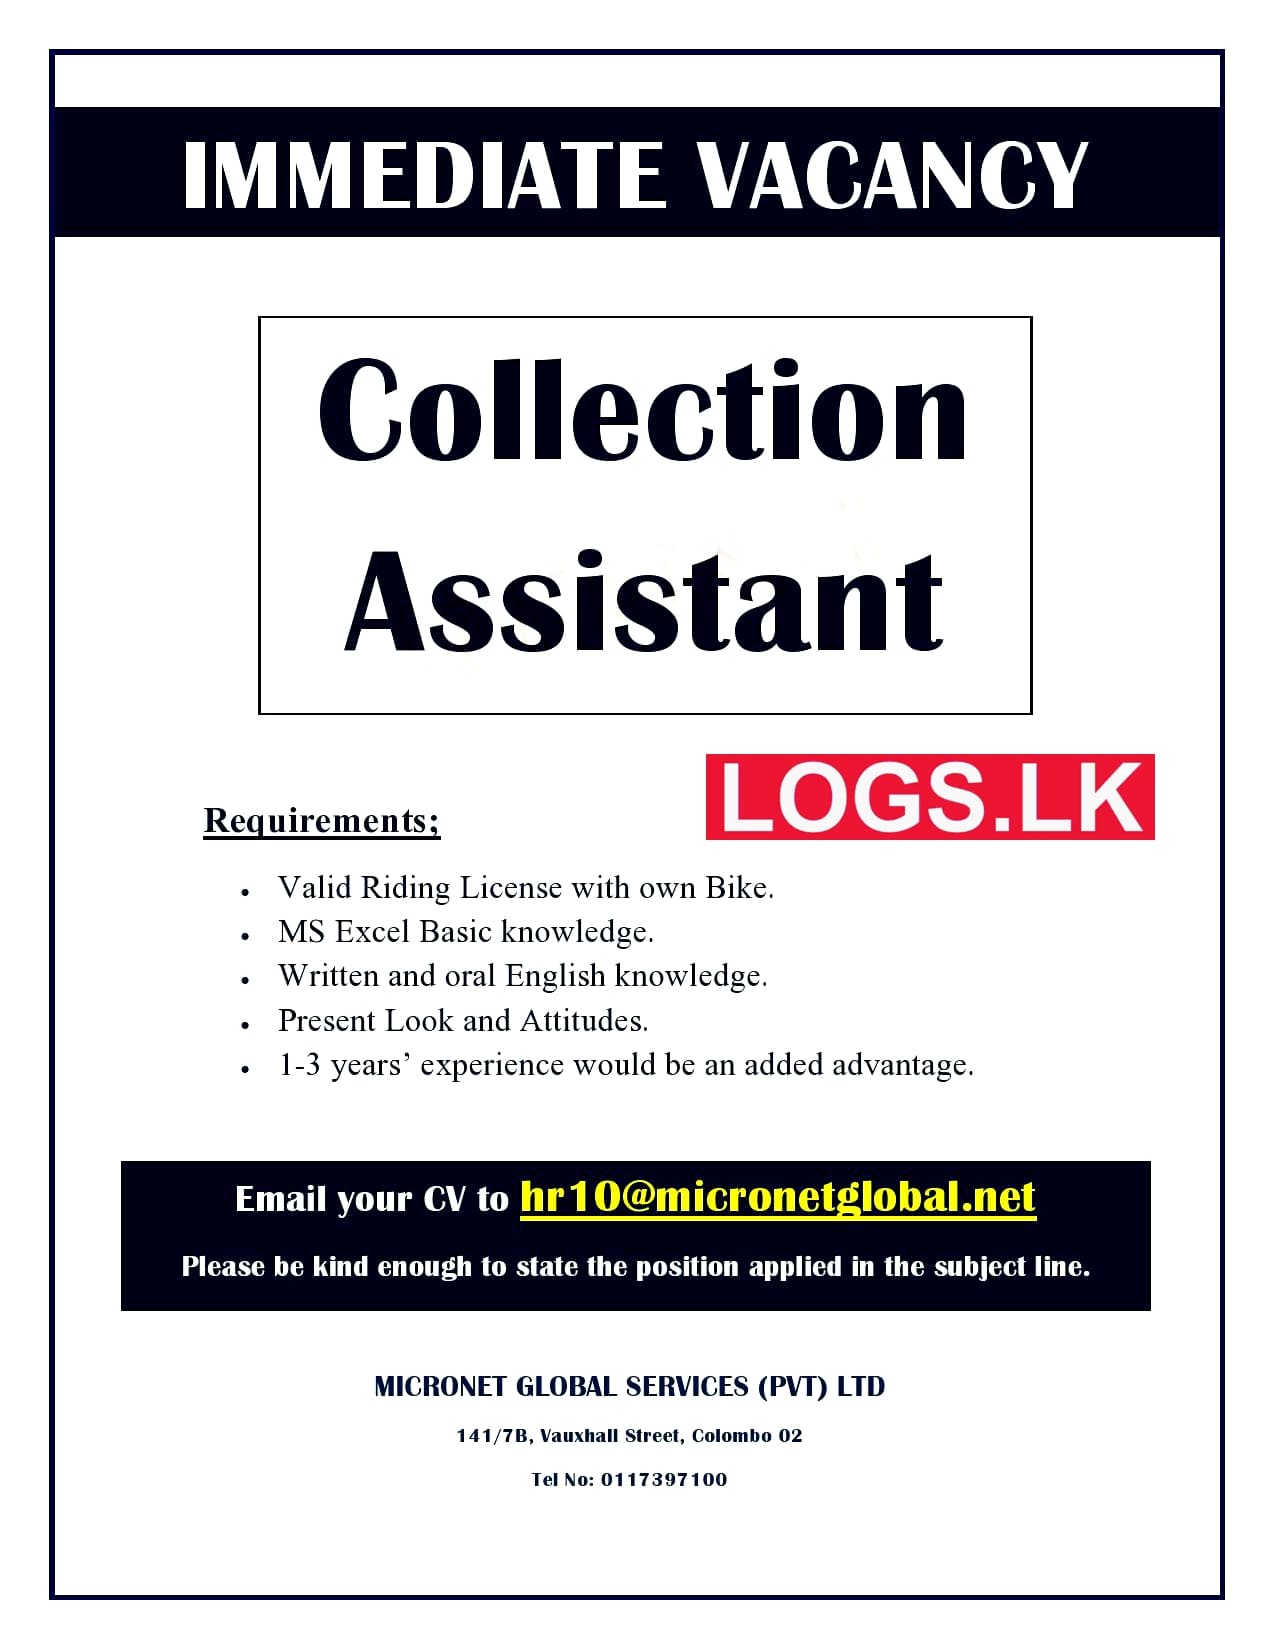 Collection Assistant Job Vacancy in Micronet Global Services Jobs Vacancies